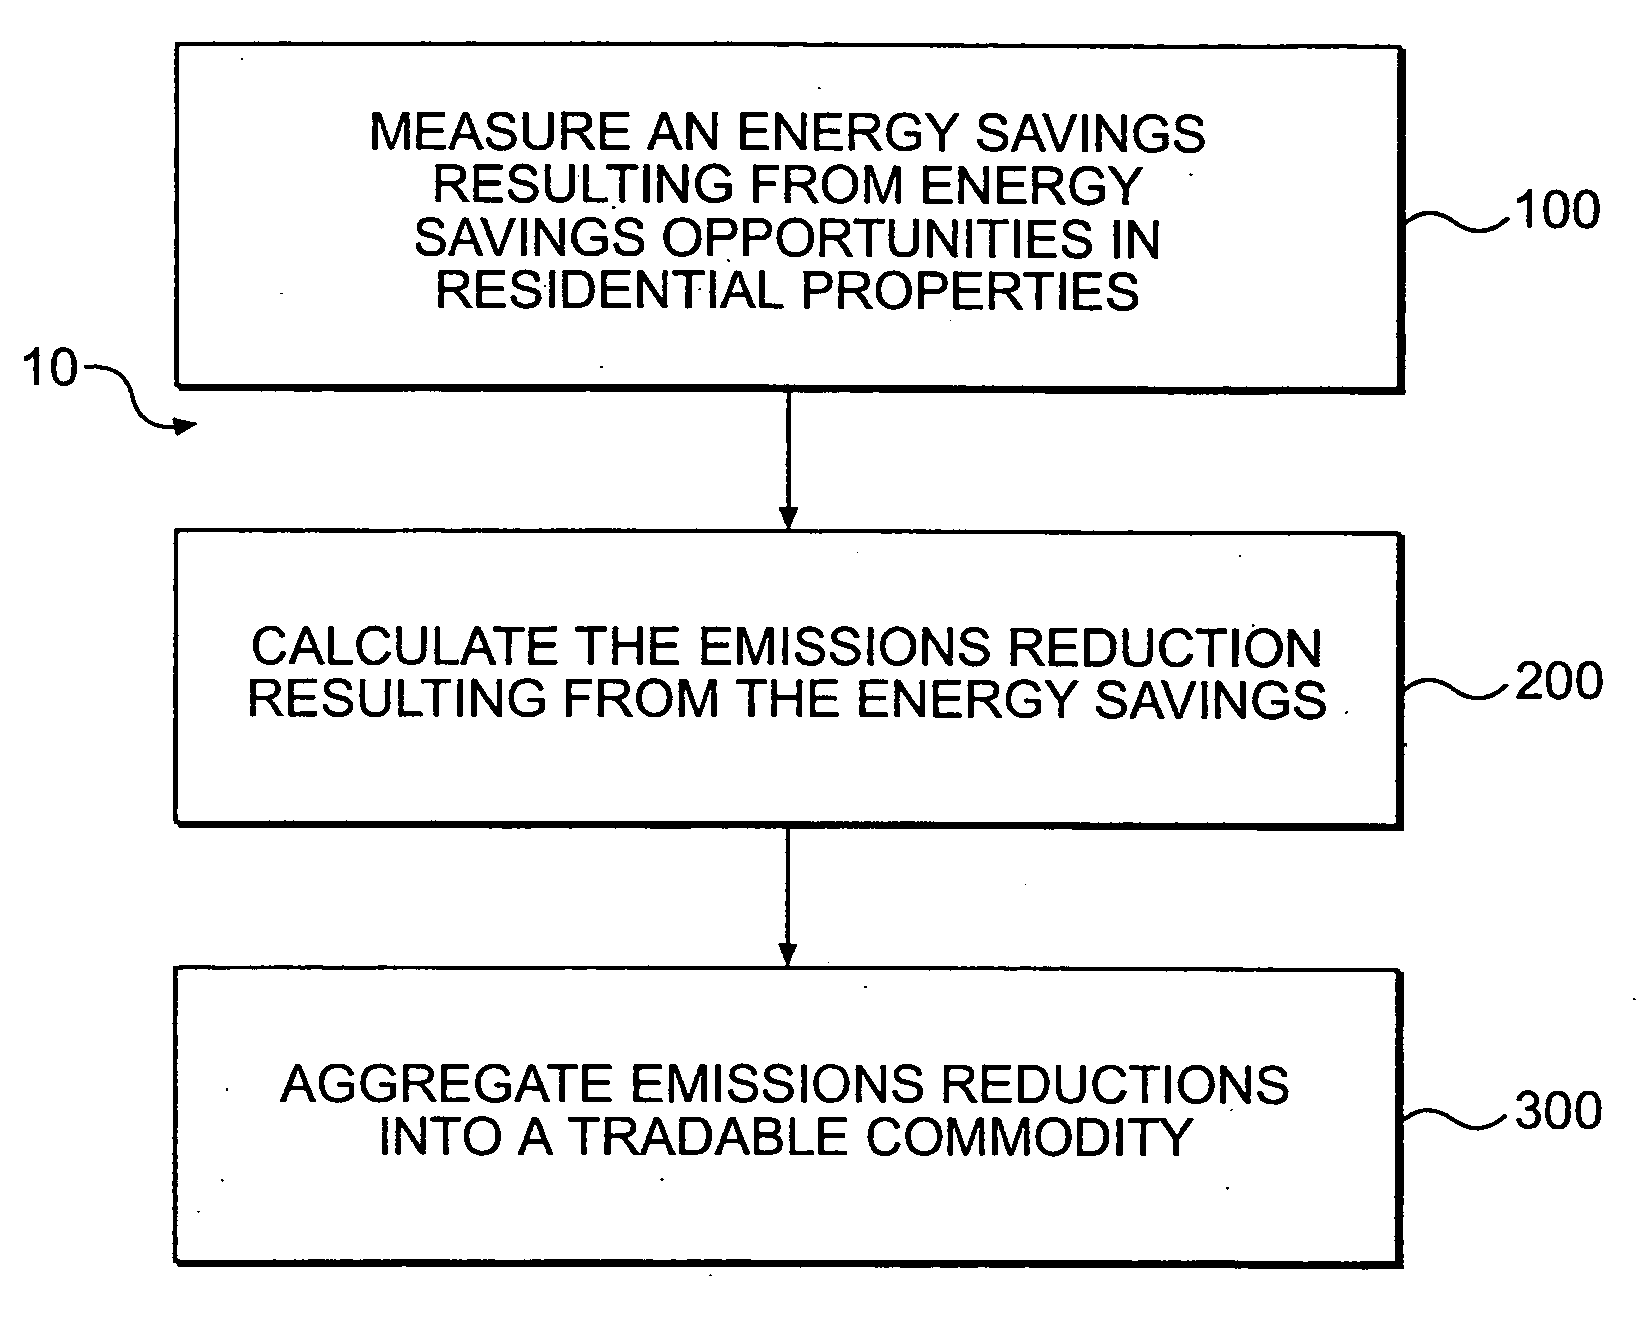 Measurement and verification protocol for tradable residential emissions reductions